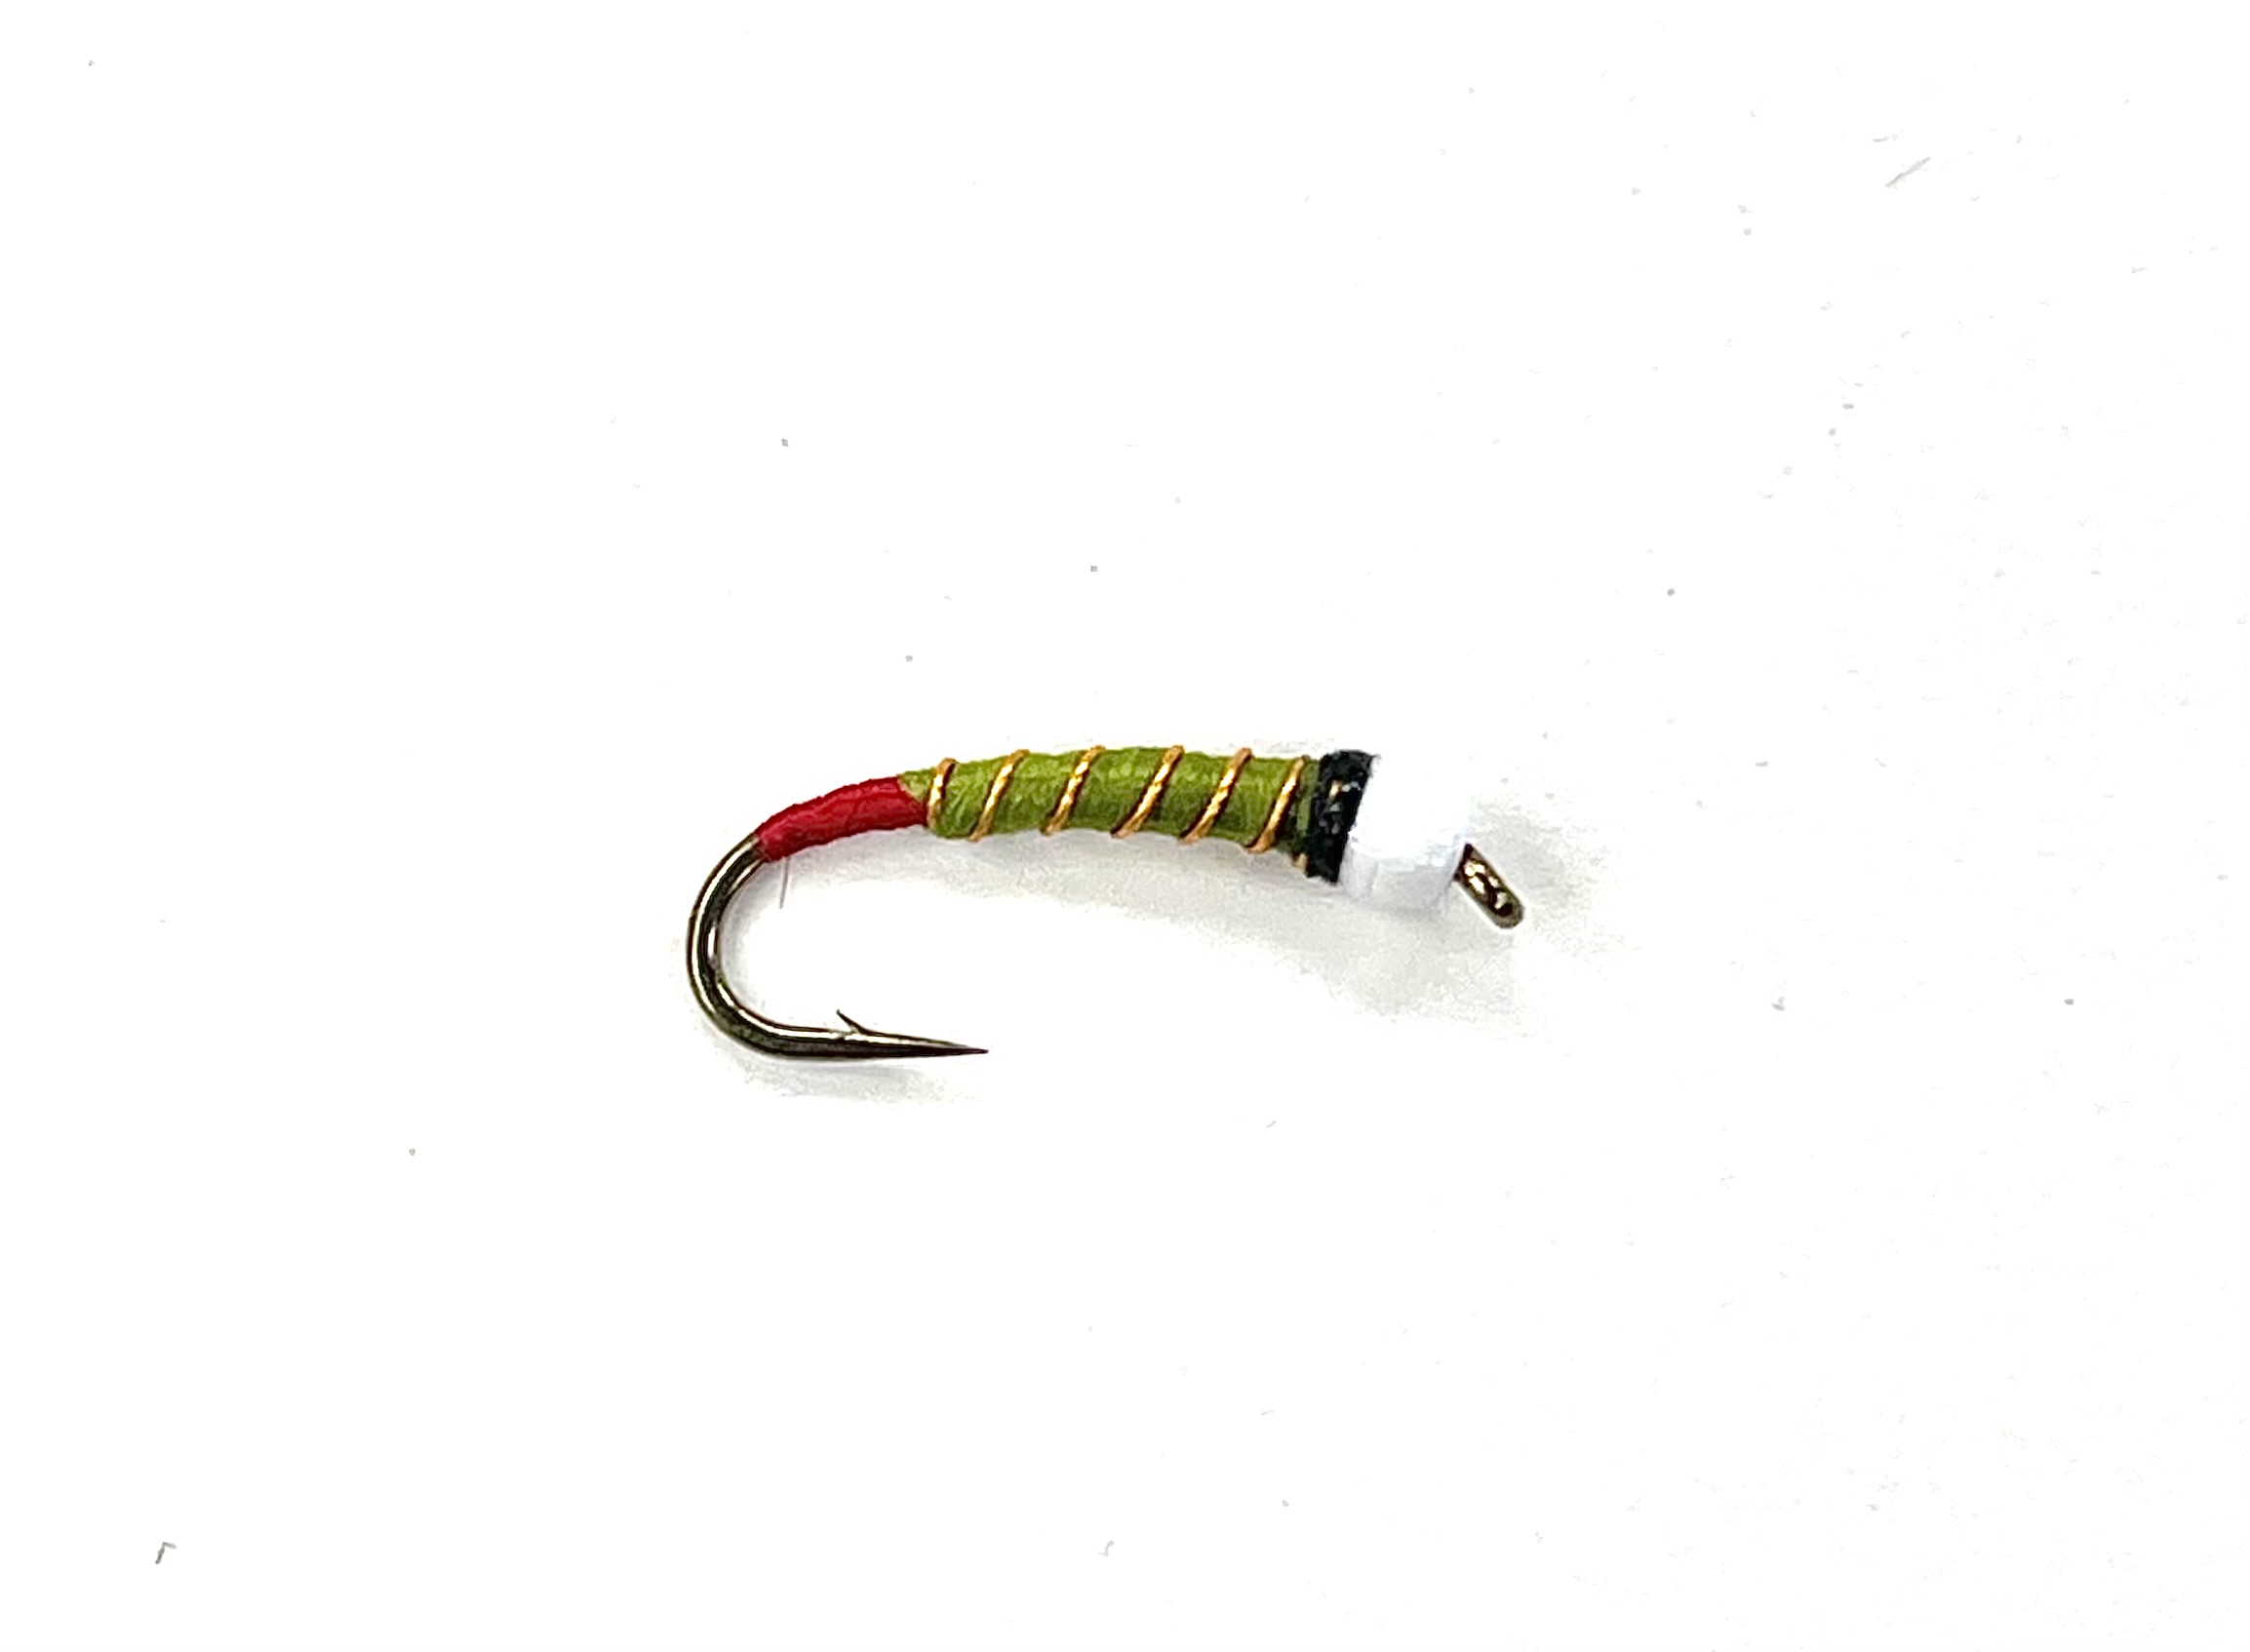 FAD Candy Cone Red Butt Chironomid - Olive/Gold Wire - Size 16